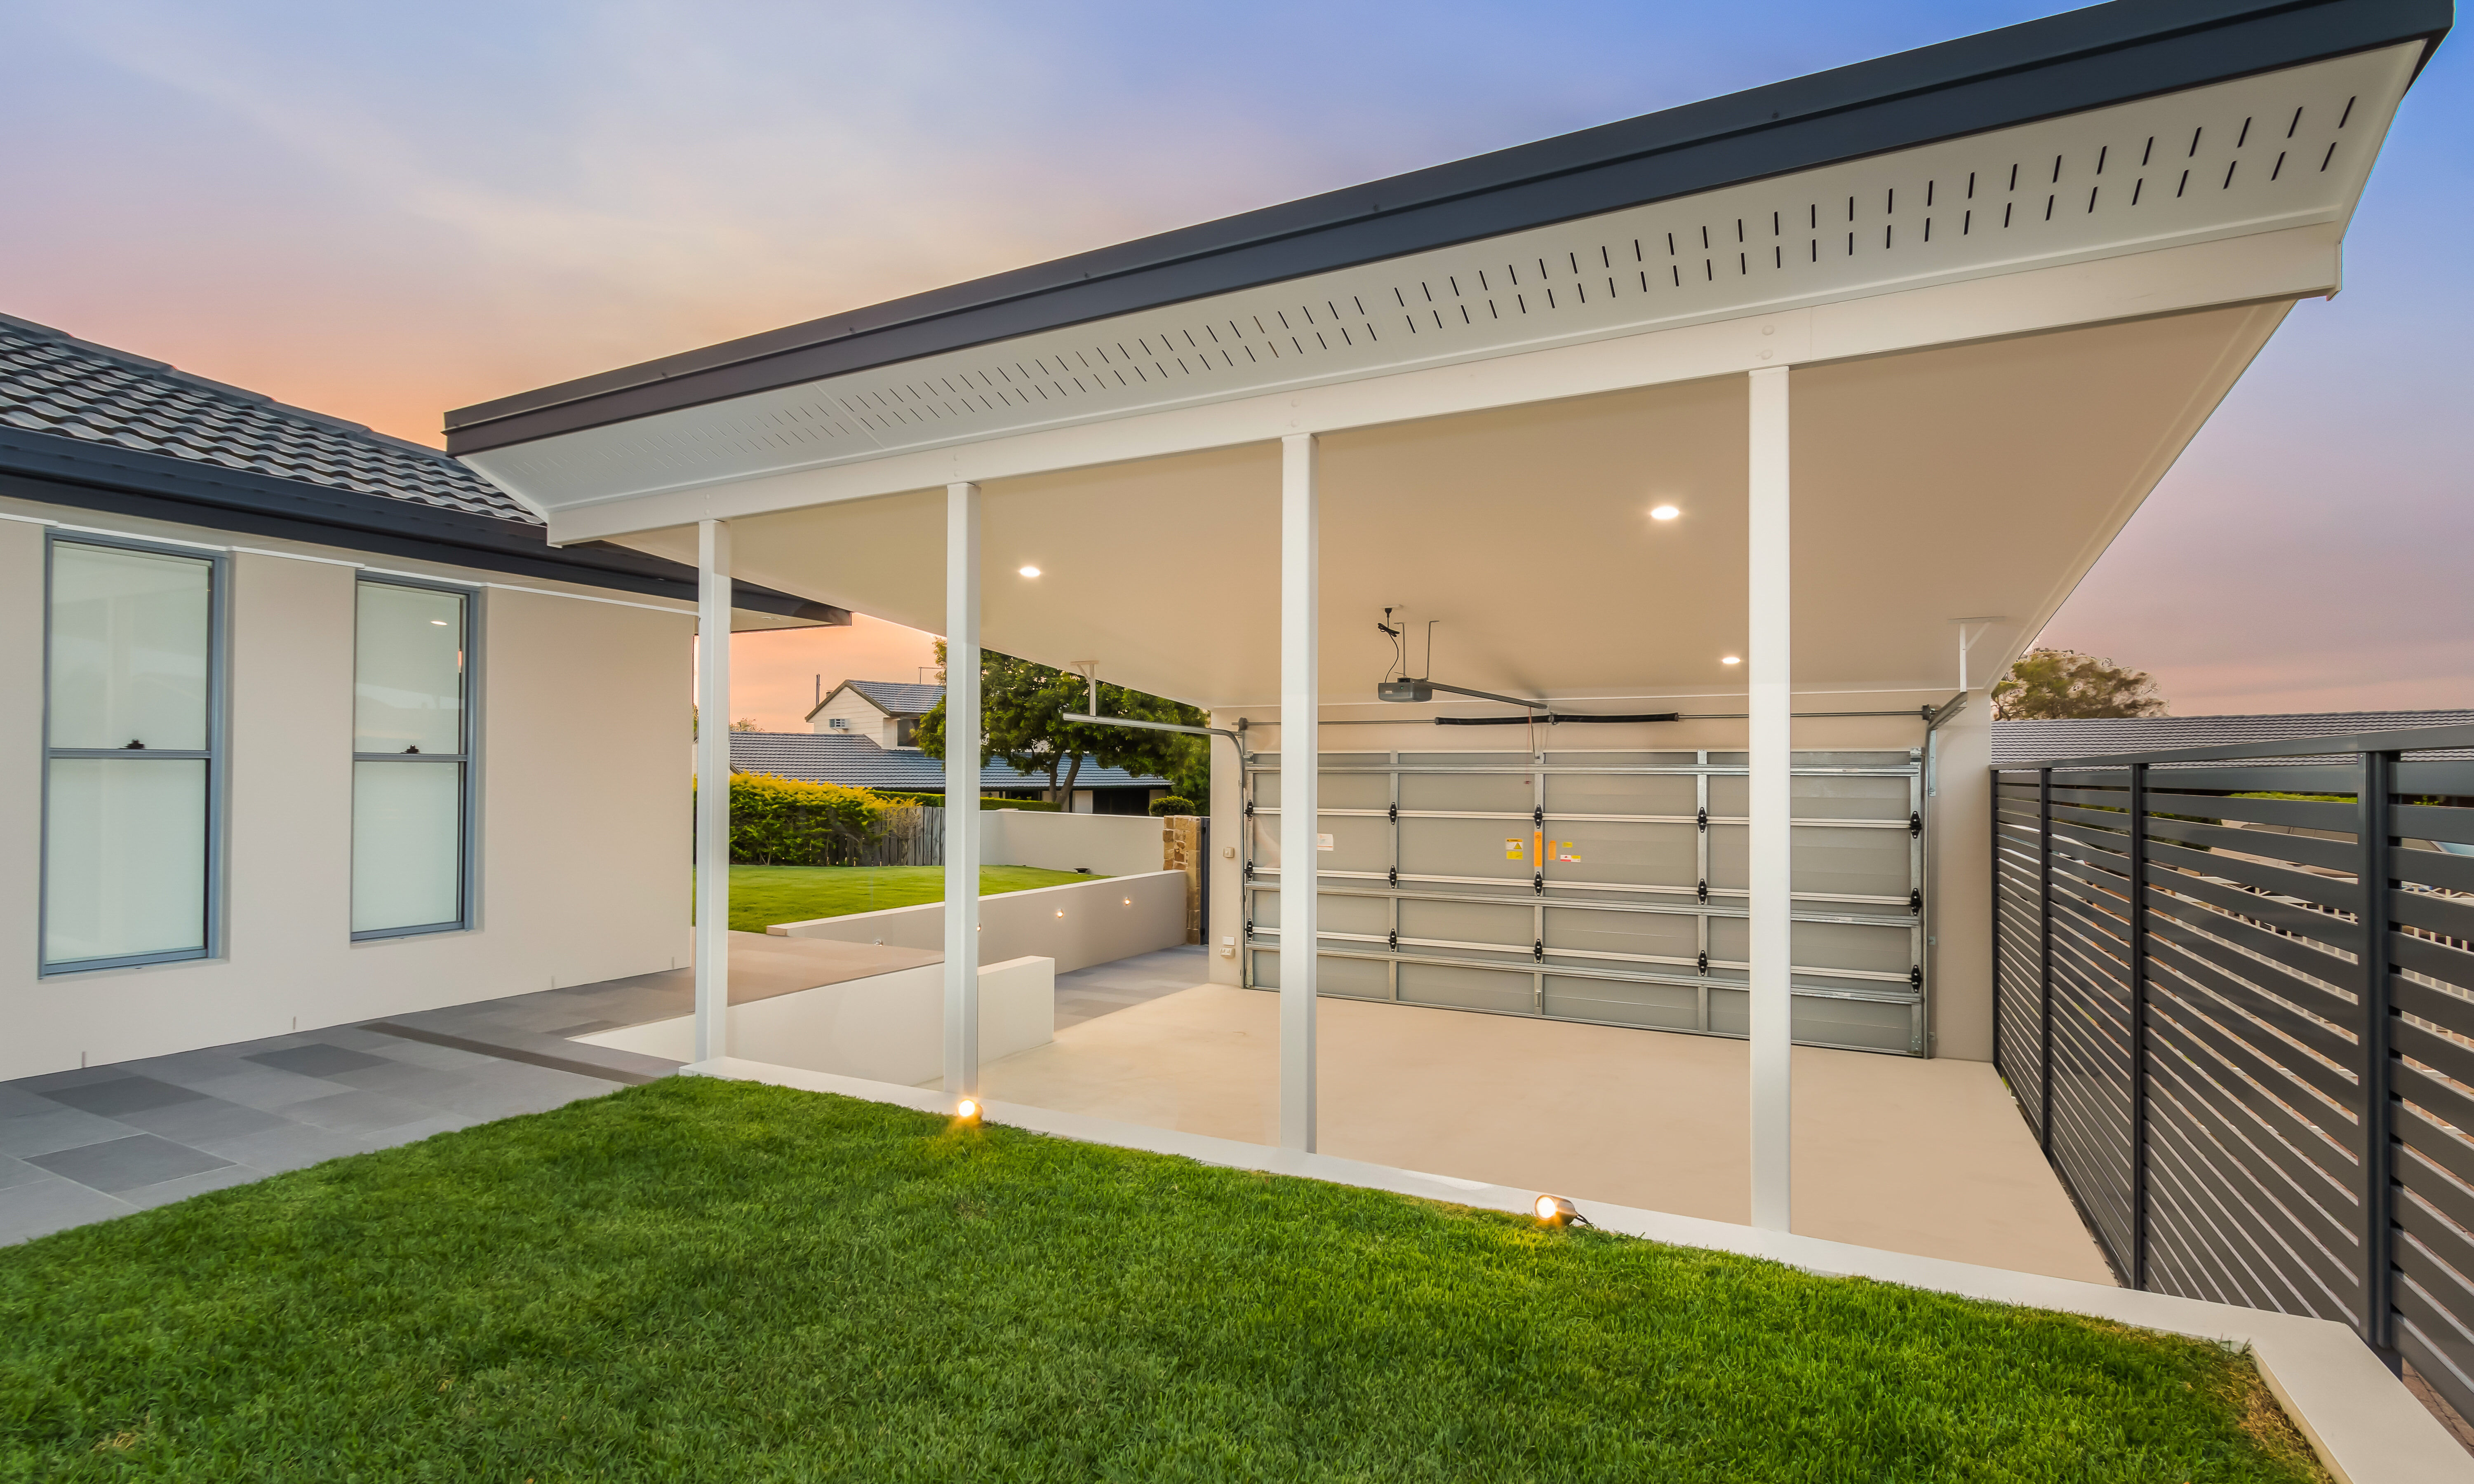 Double carport and front entry with featured tiled pathway and external lights